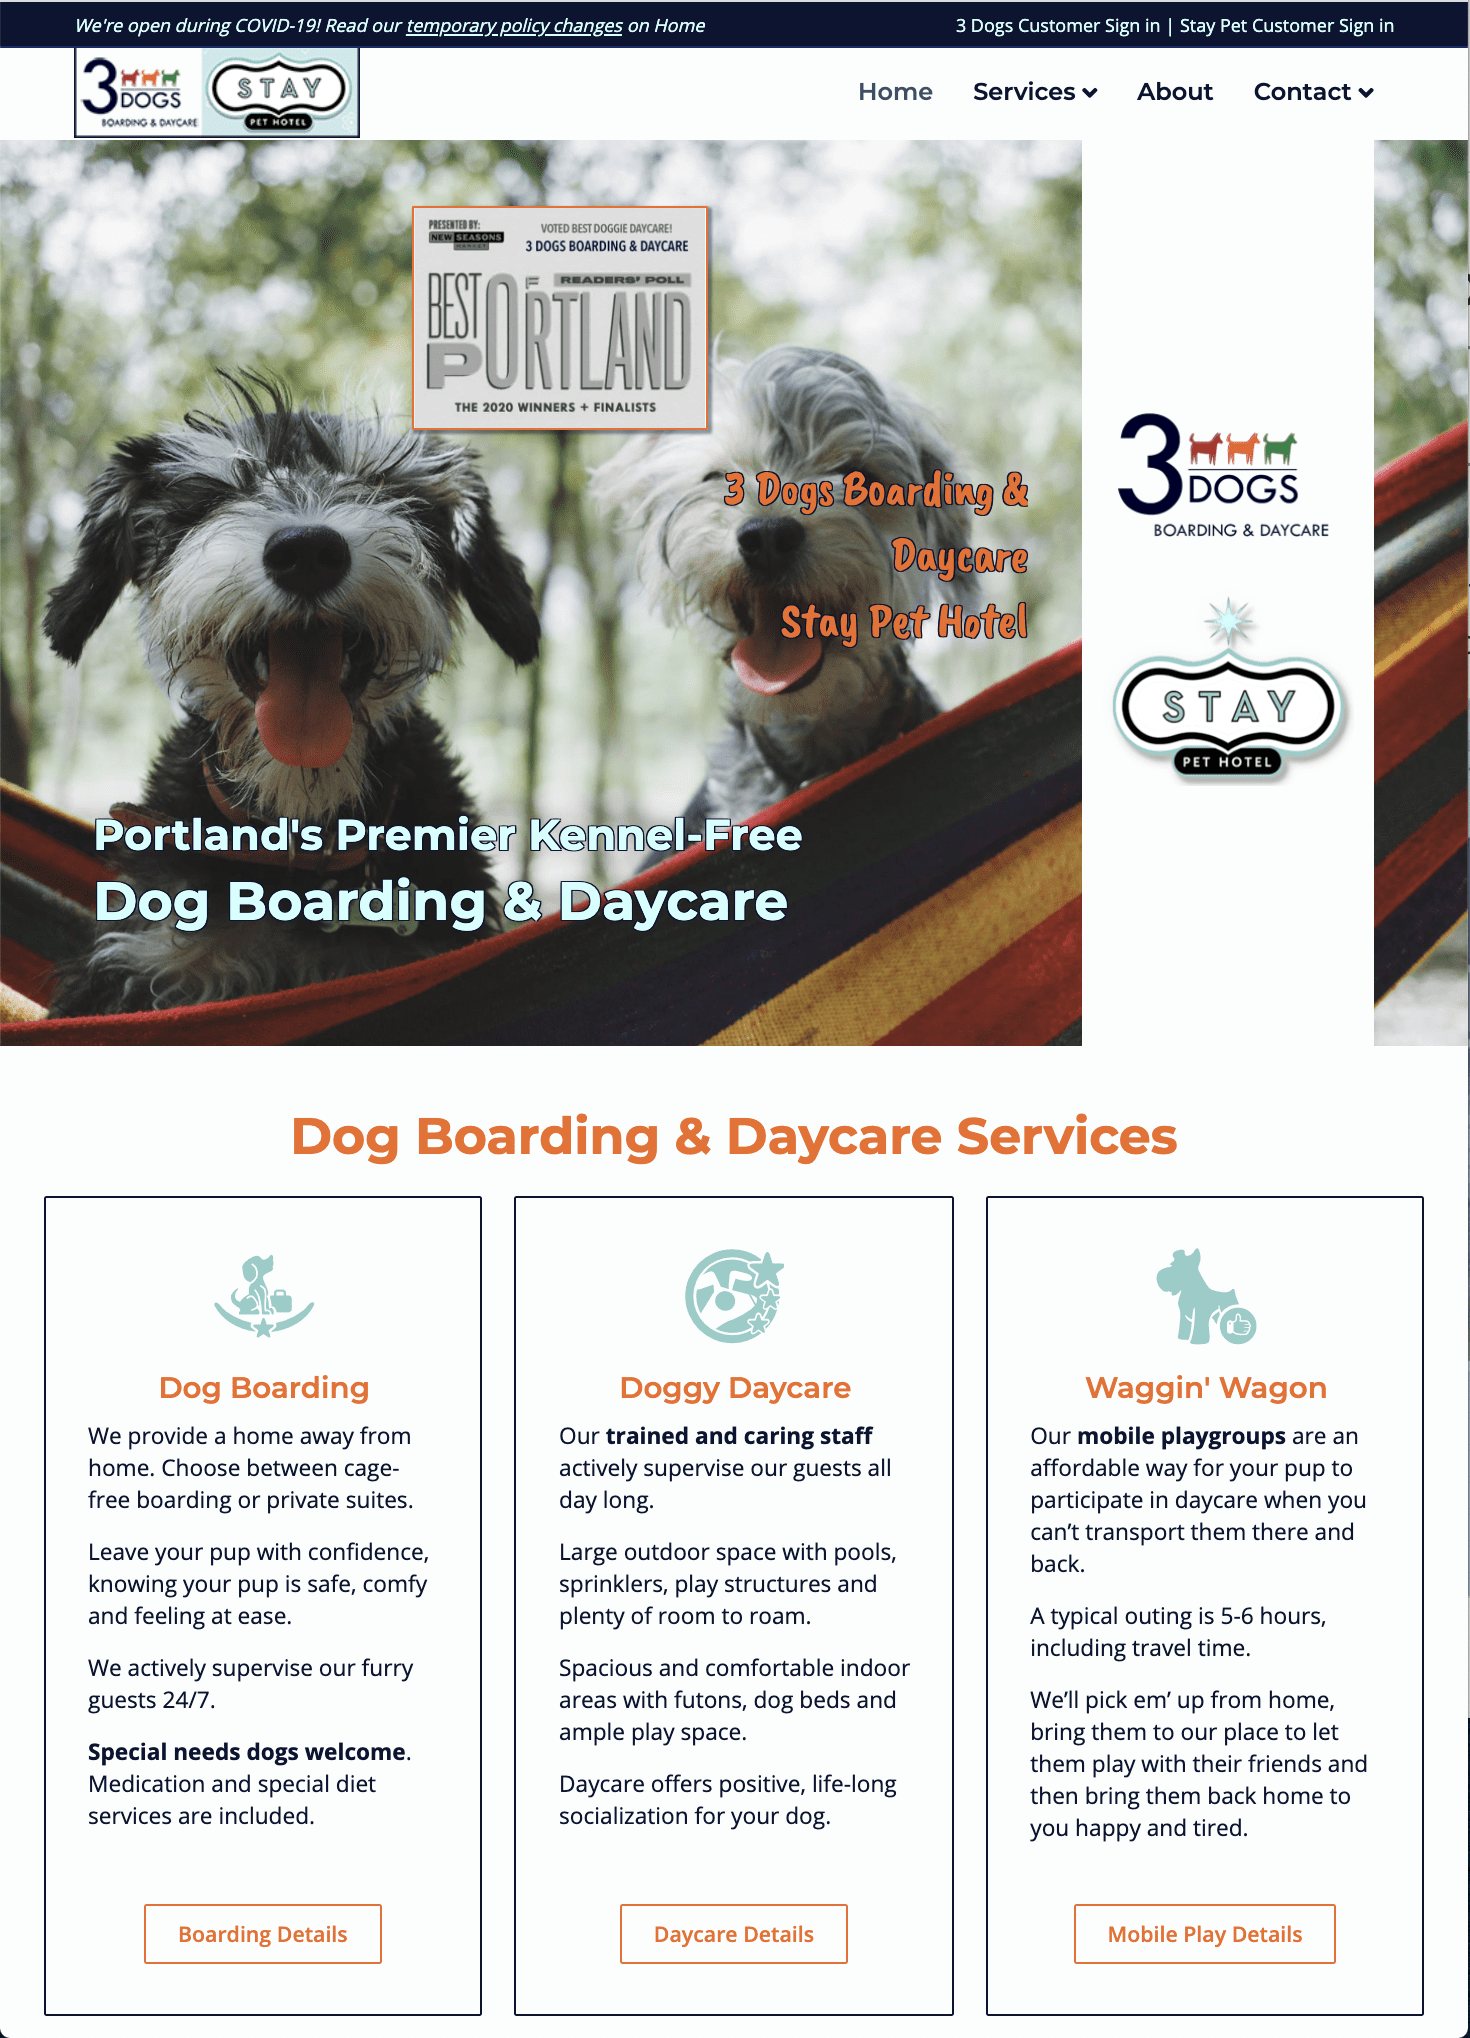 Dog boarding and daycare client with phone app and customer portal